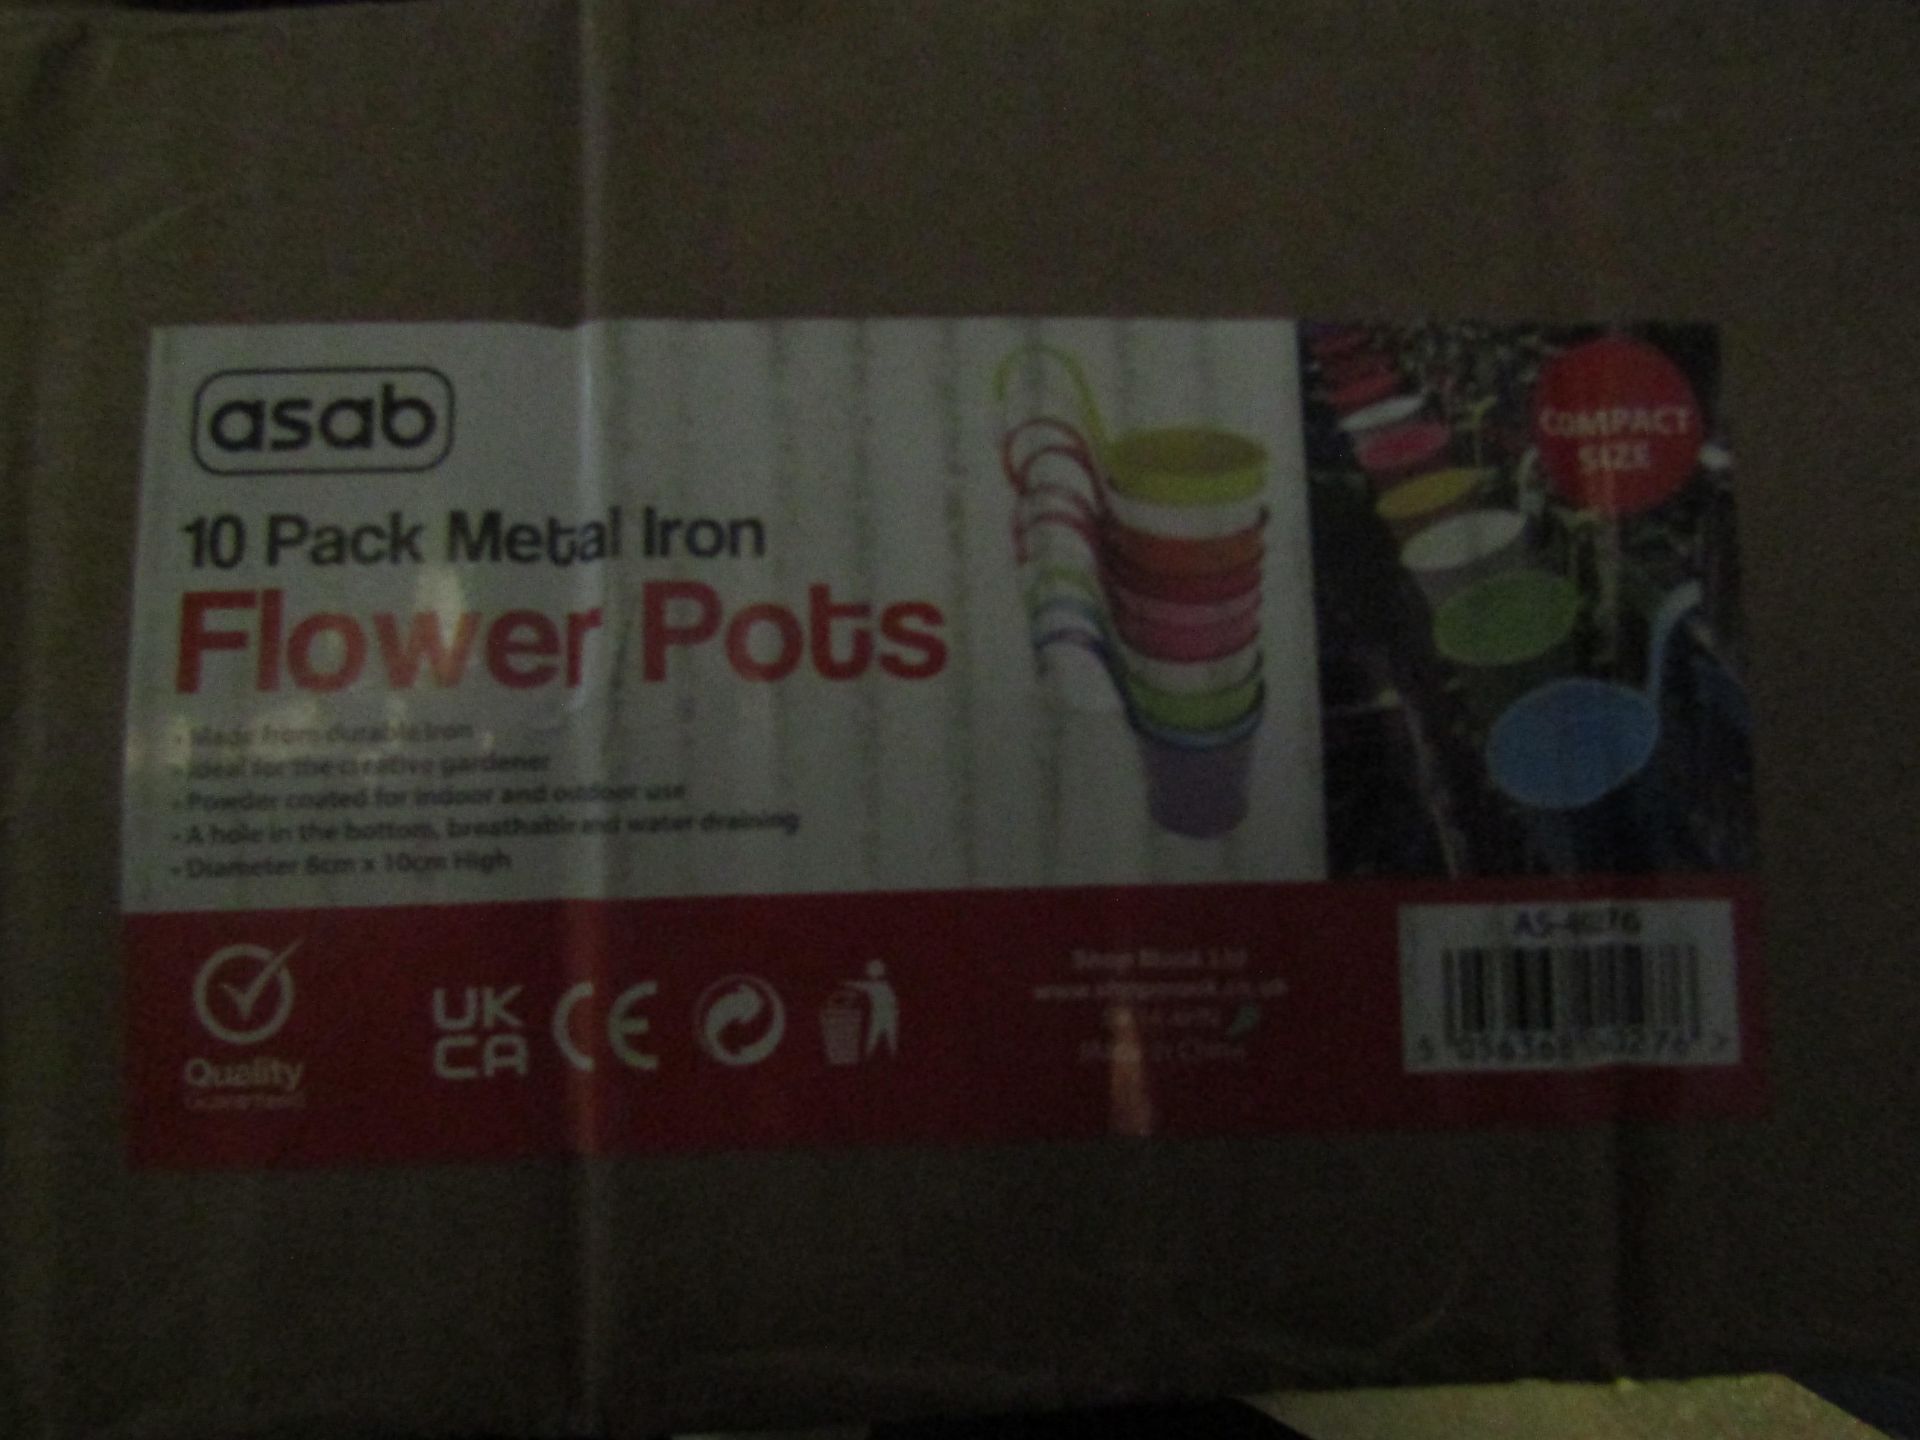 Asab 10 Pack Metal Iron Flower Pots, Multicoloured - Unchecked & Boxed.